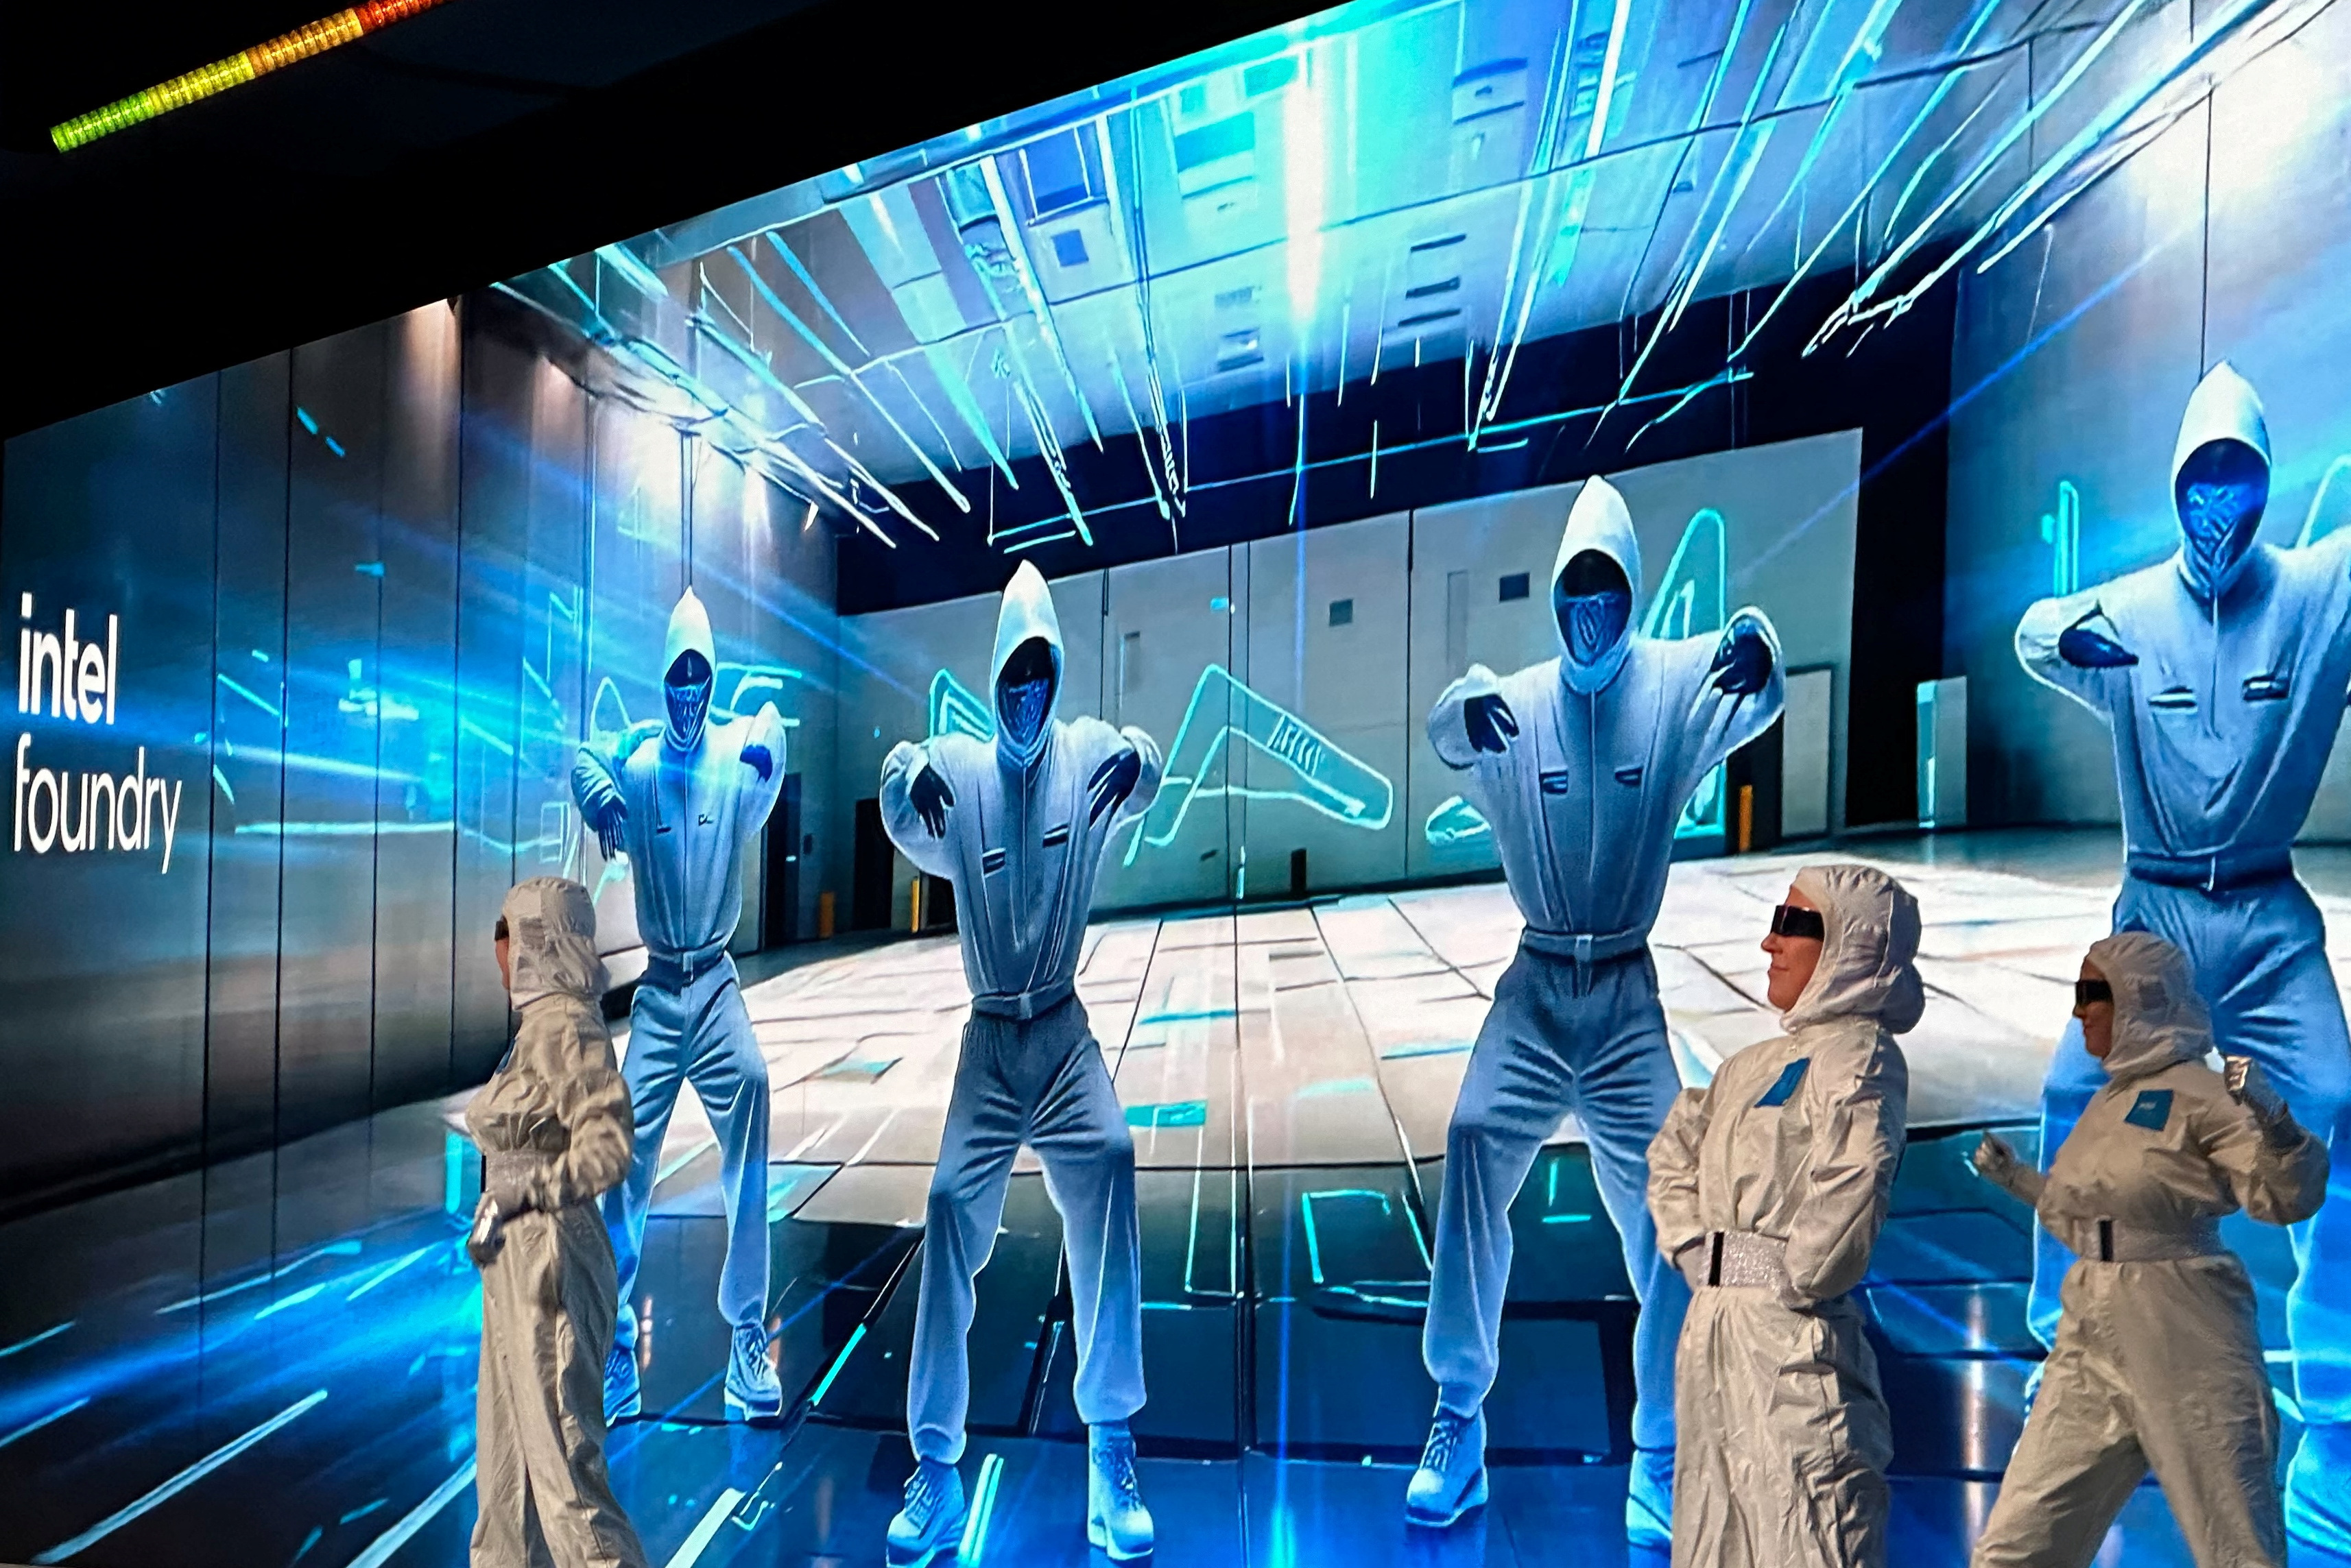 Dancers perform at an Intel Foundry semiconductor manufacturing event in San Jose